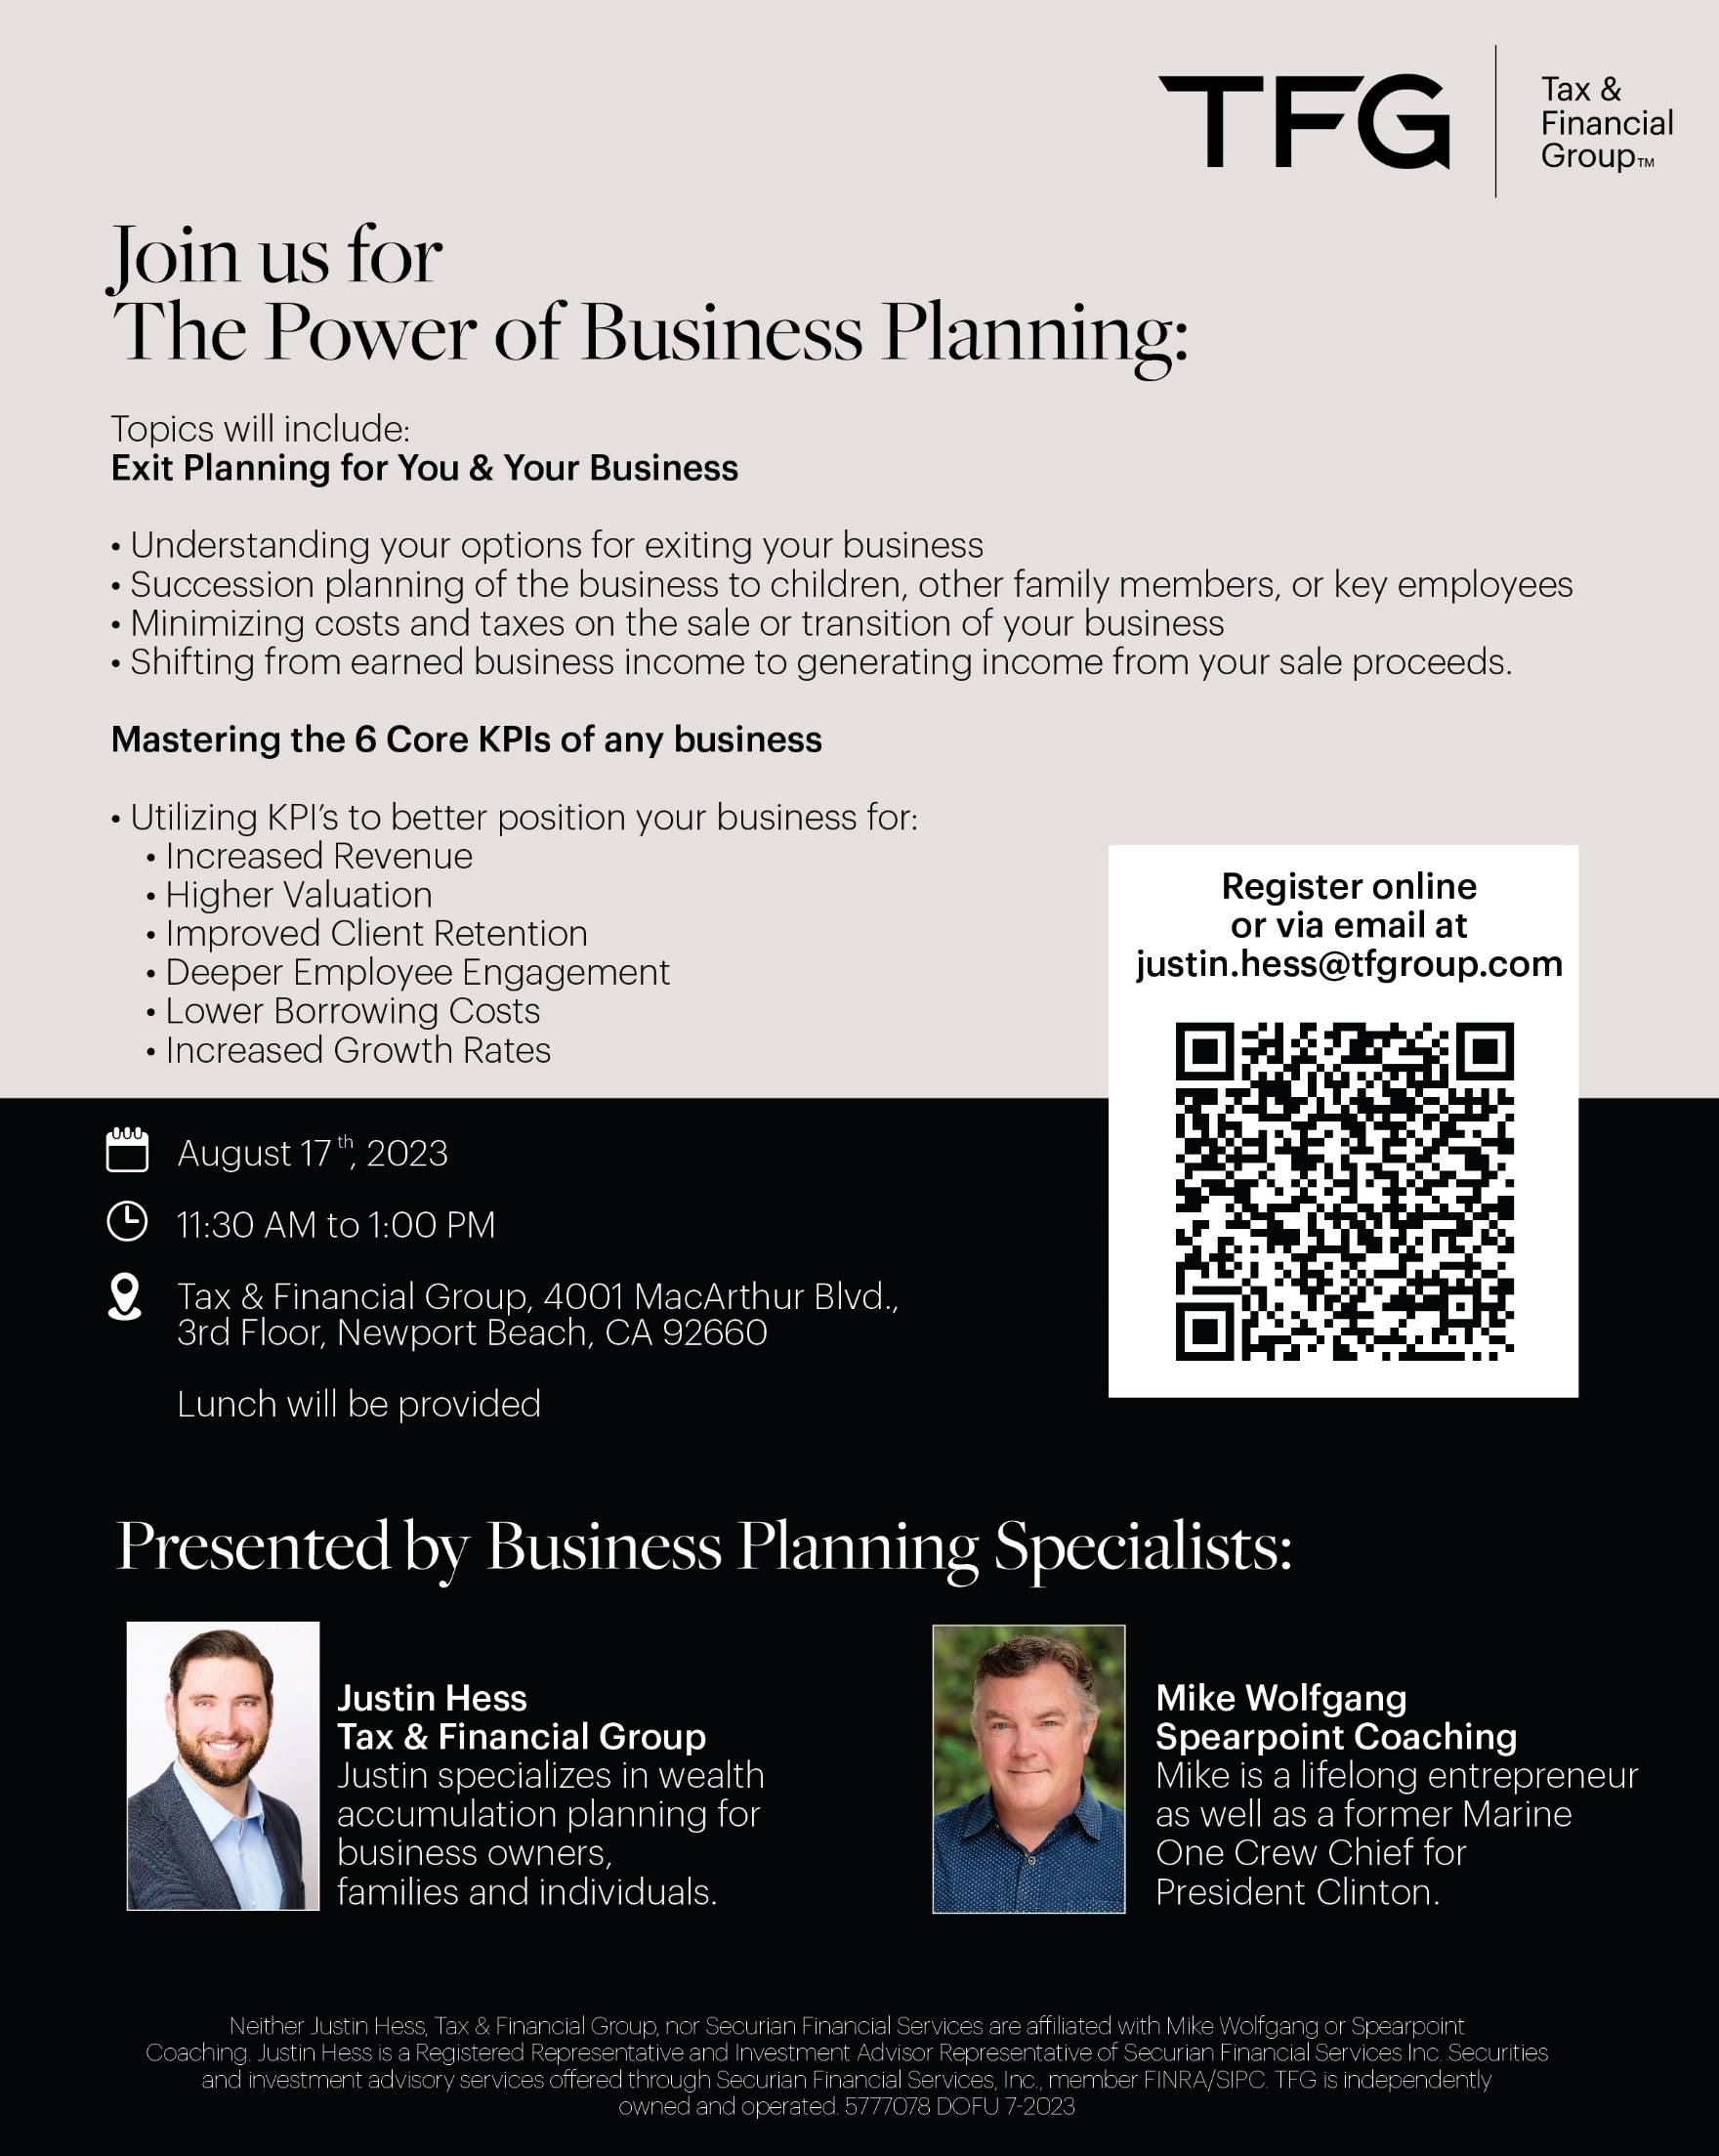 The Power of Business Planning Presented by: Tax & Financial Group and Spearpoint Coaching